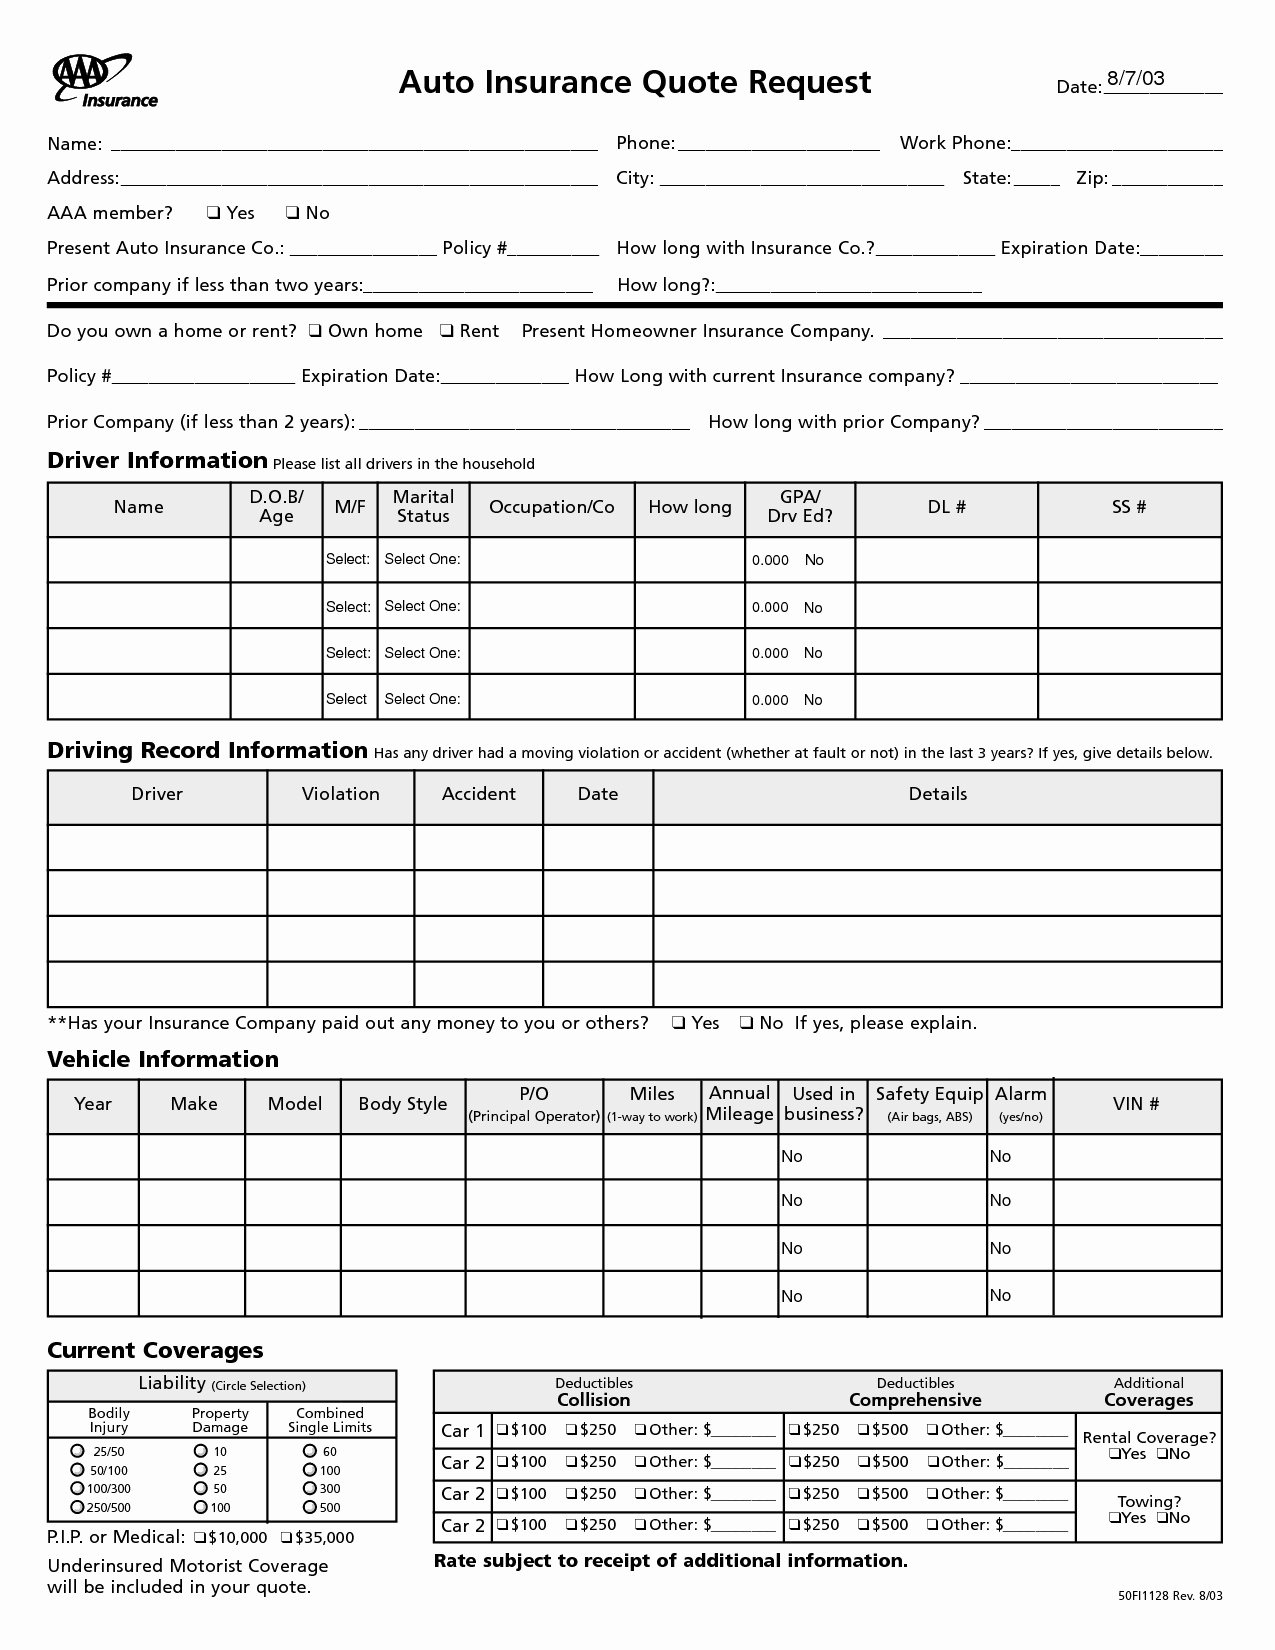 Home Insurance Quote Sheet Elegant All Quote Templates Archives